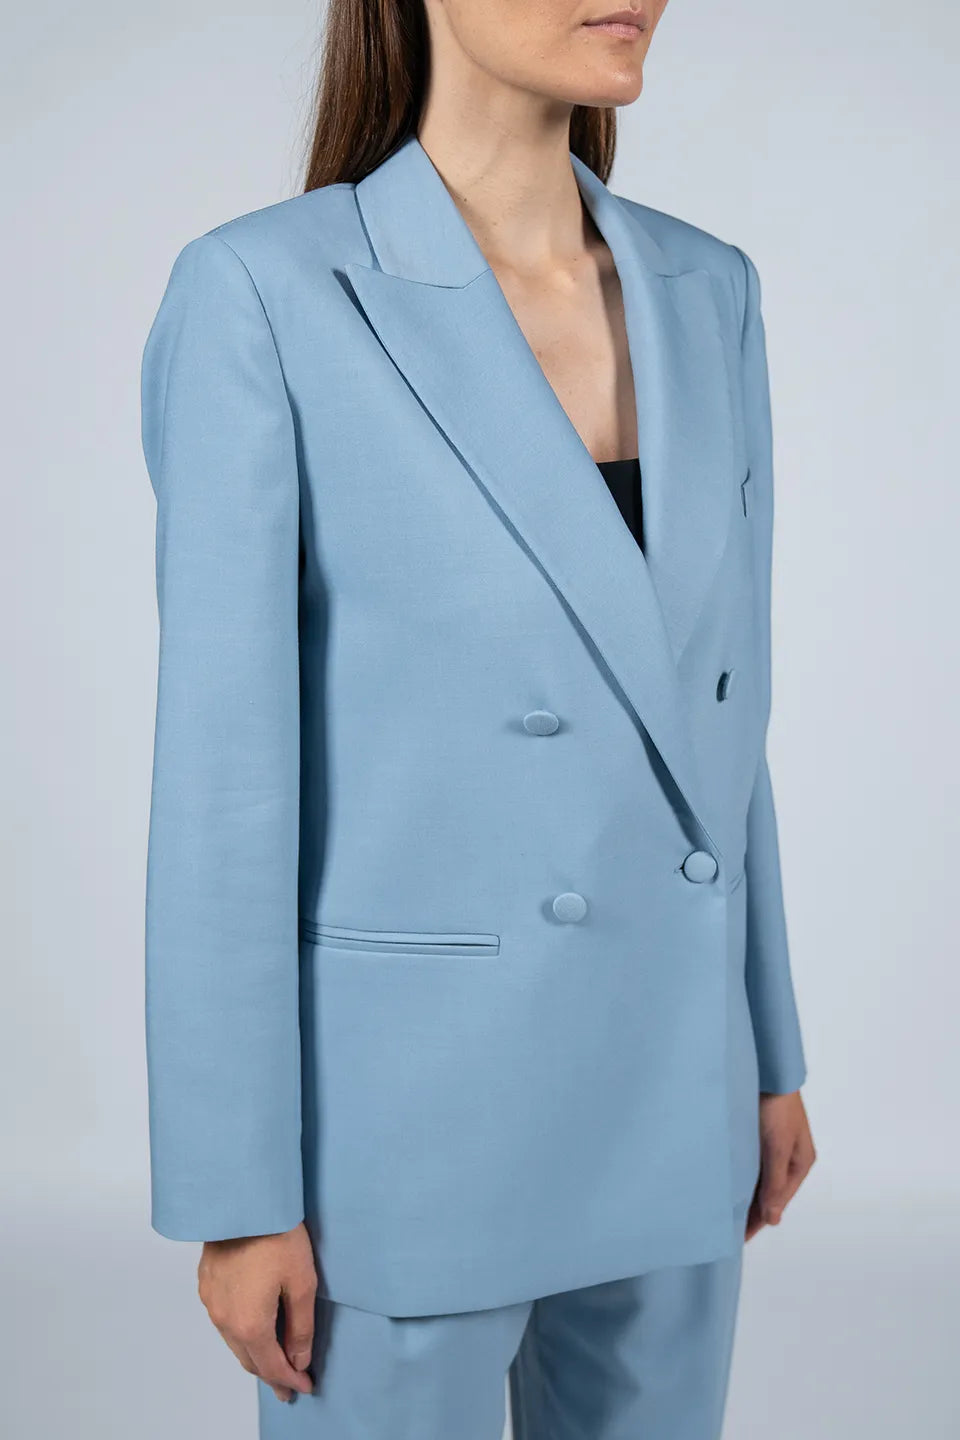 Designer Blue Women blazers, Jacket, shop online with free delivery in UAE. Product gallery 5